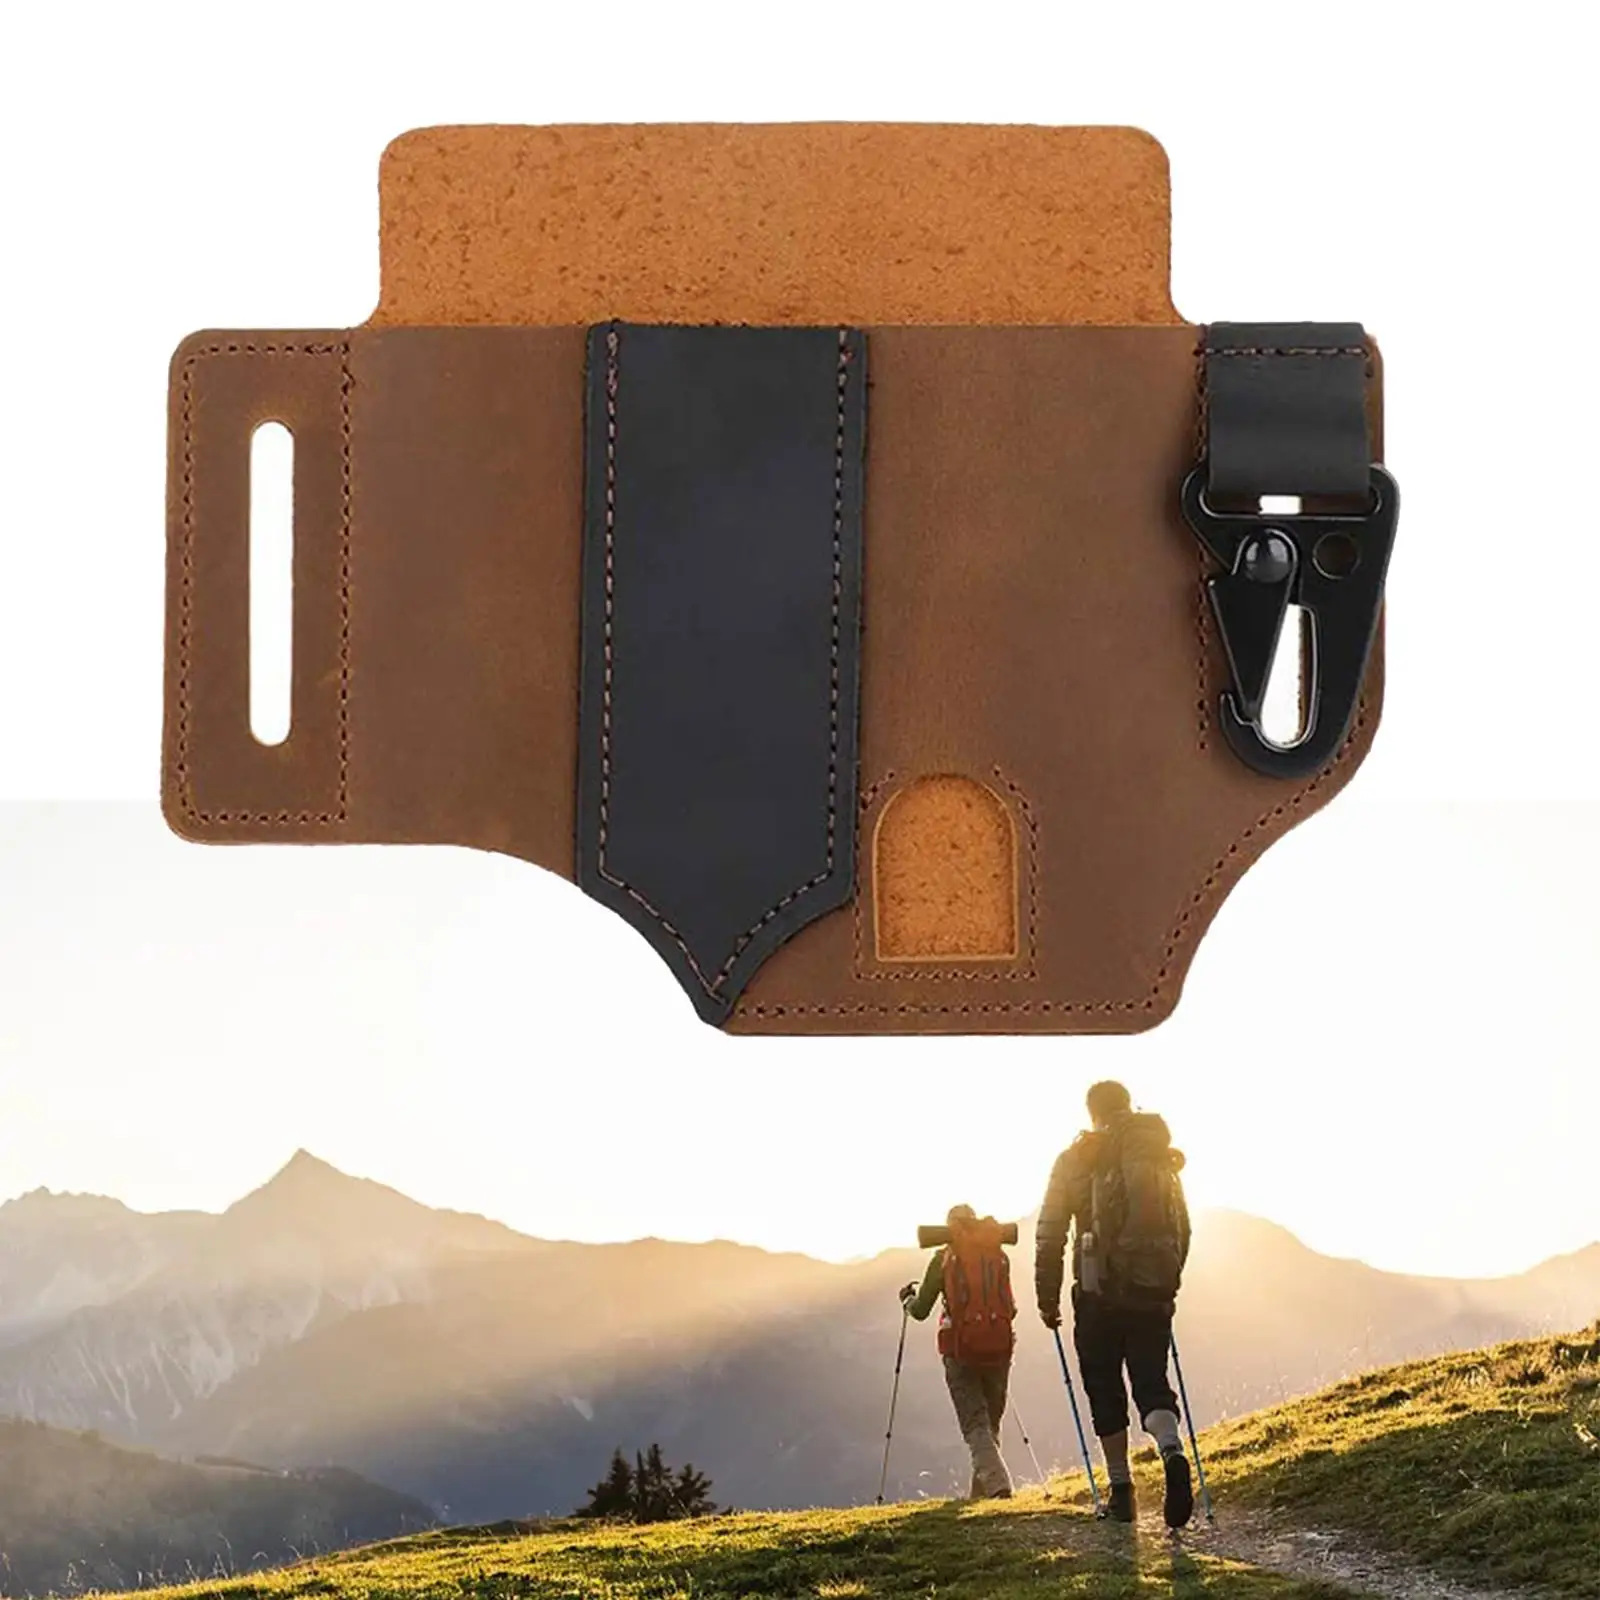 Leather Sheath, Multitool Sheath and Keychain Clip, Pocket Organizer for Men Tools, Belt, Work and Daily Use